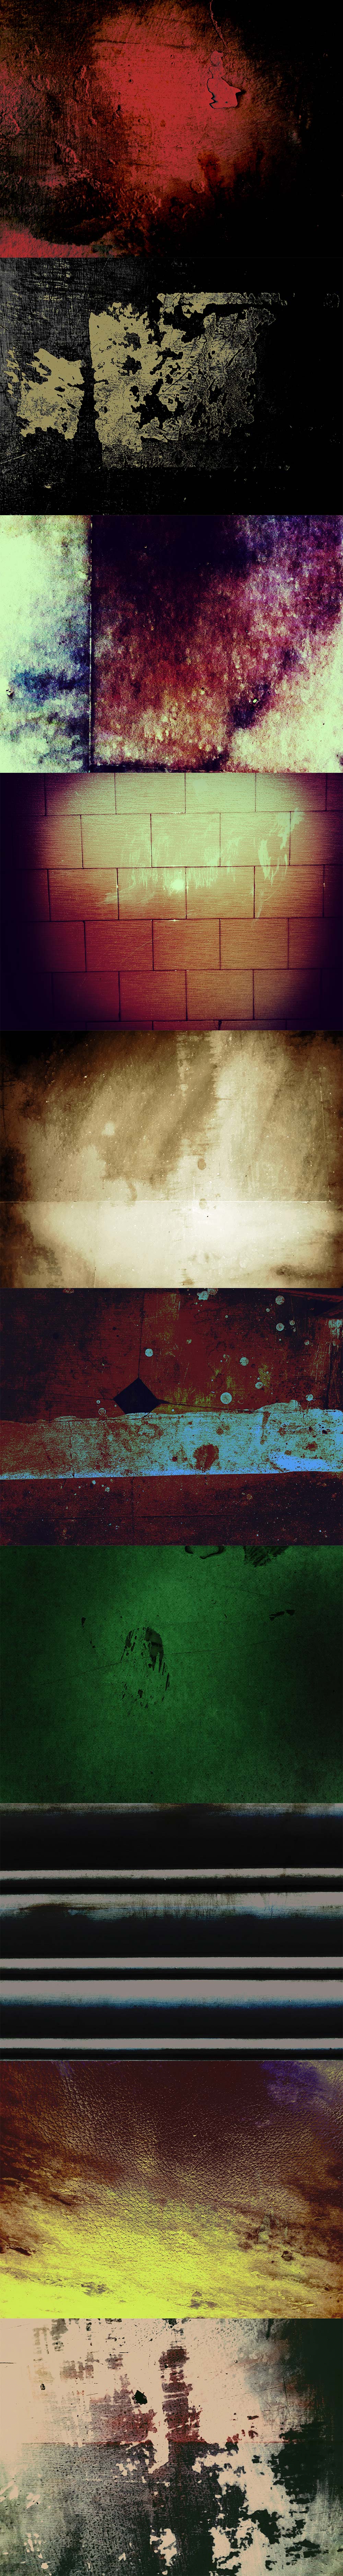 http://www.graphicsfuel.com/wp-content/uploads/2015/02/free-intense-dramatic-textures.jpg